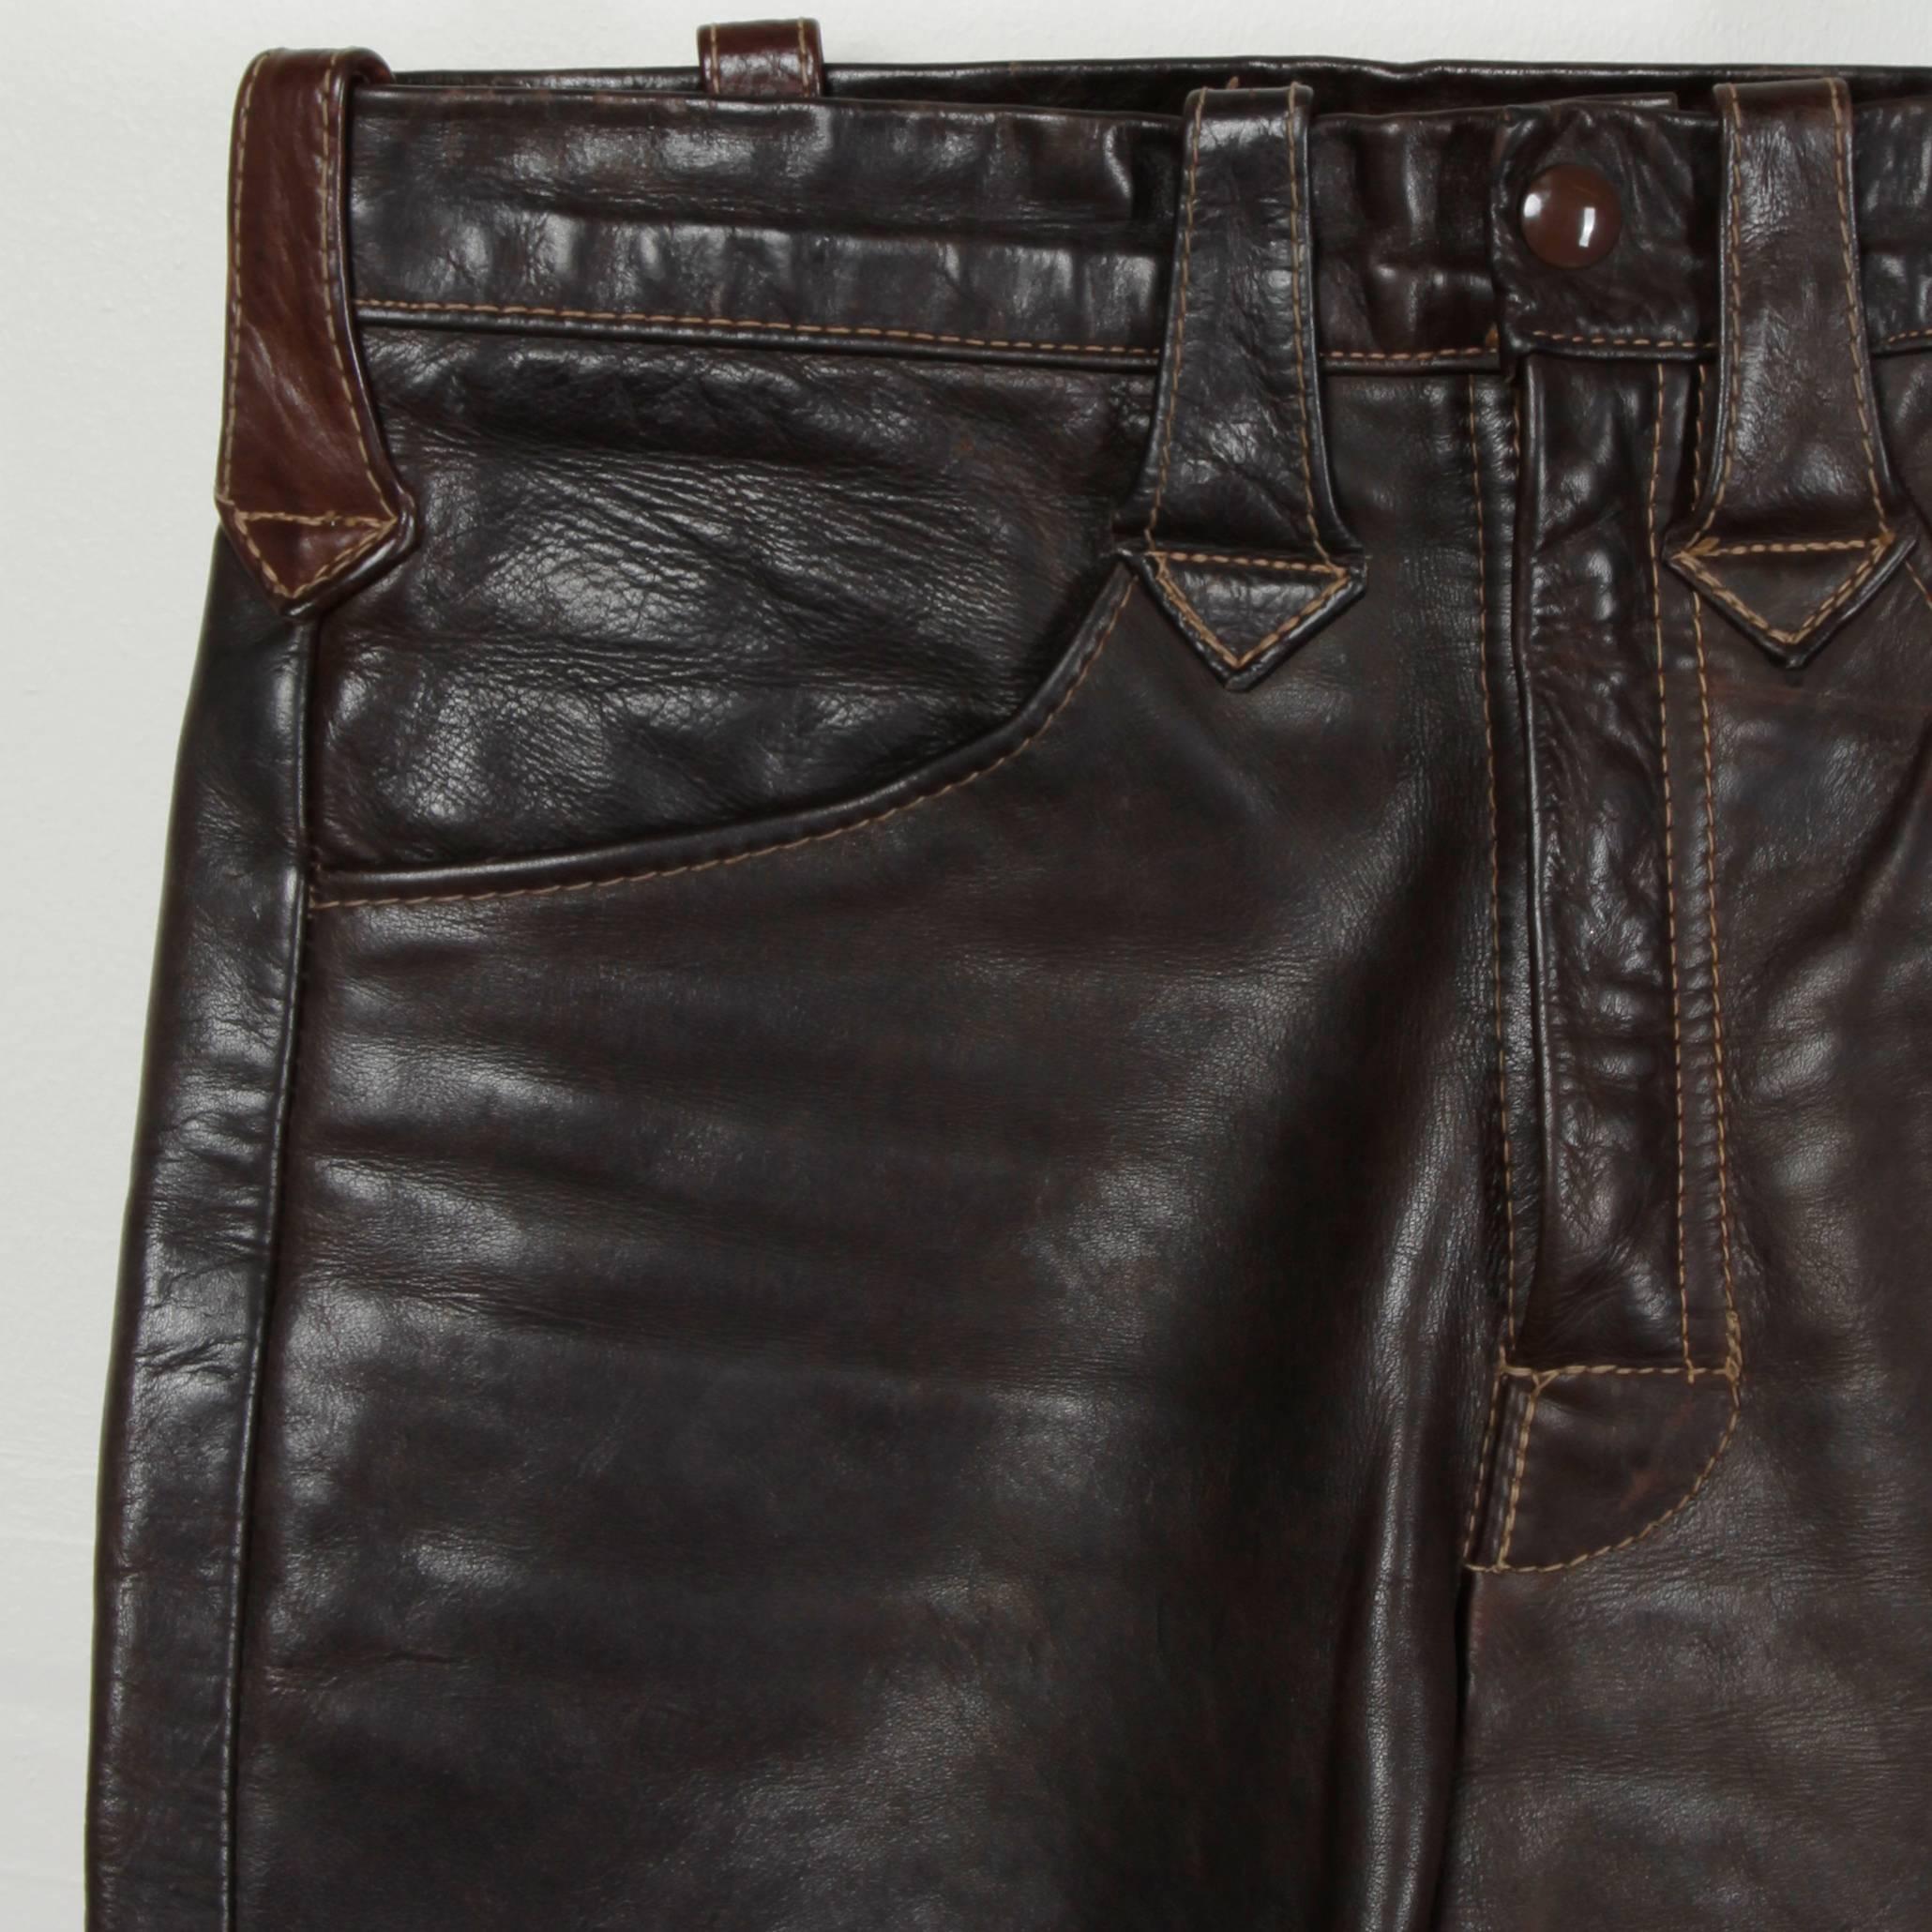 Legendary East West Musical Instruments vintage hand crafted leather bell bottom pants in dark brown. Flared leg and supple worn in leather with an excellent patina and plenty of wear left in them. Highly collectible label with the phone number of